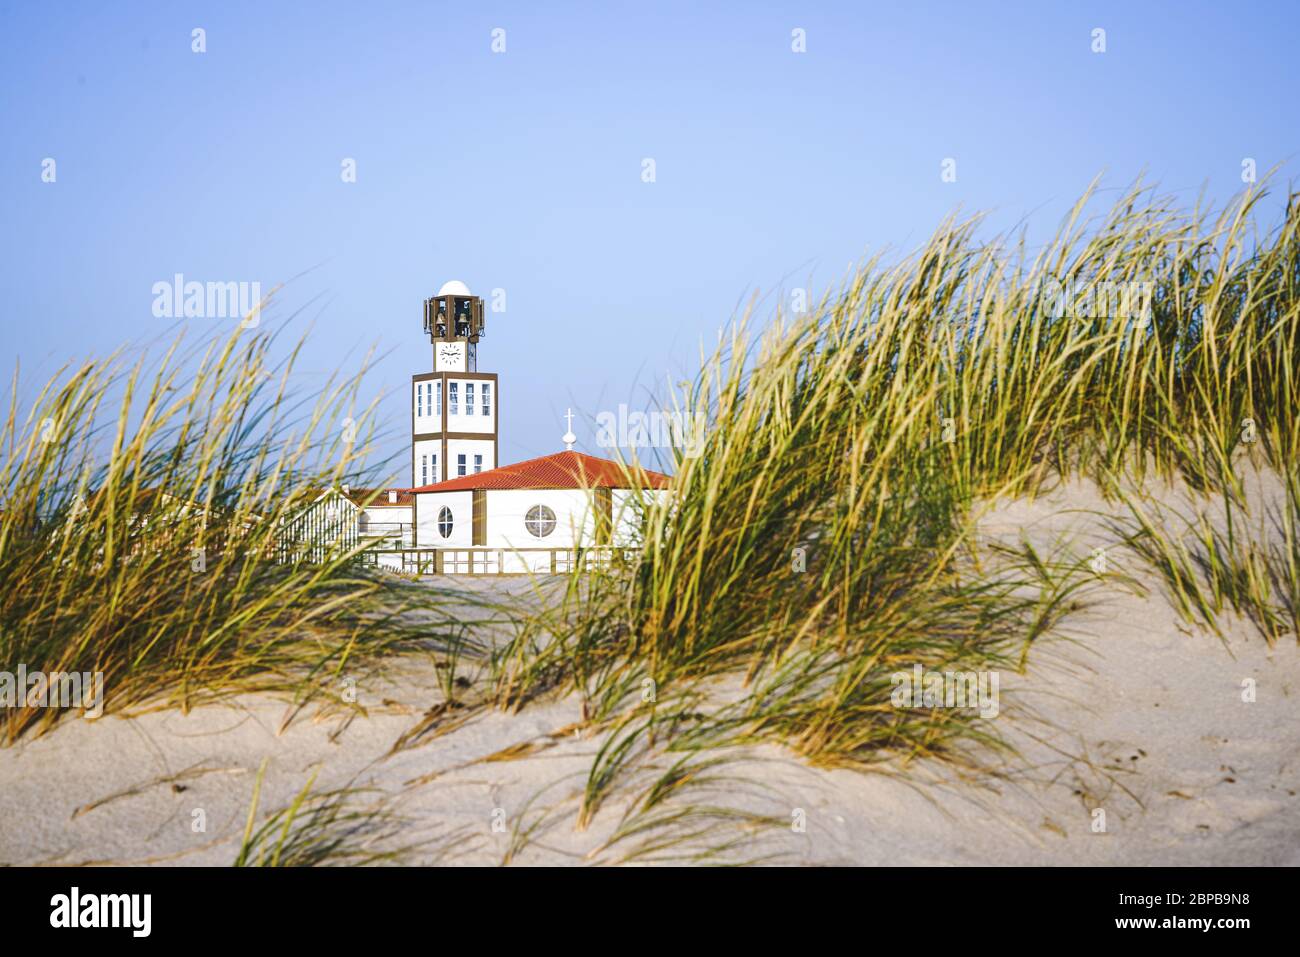 Costa nova church and tower naturally framed with beach sand dunes and sea oats during daylight. Stock Photo